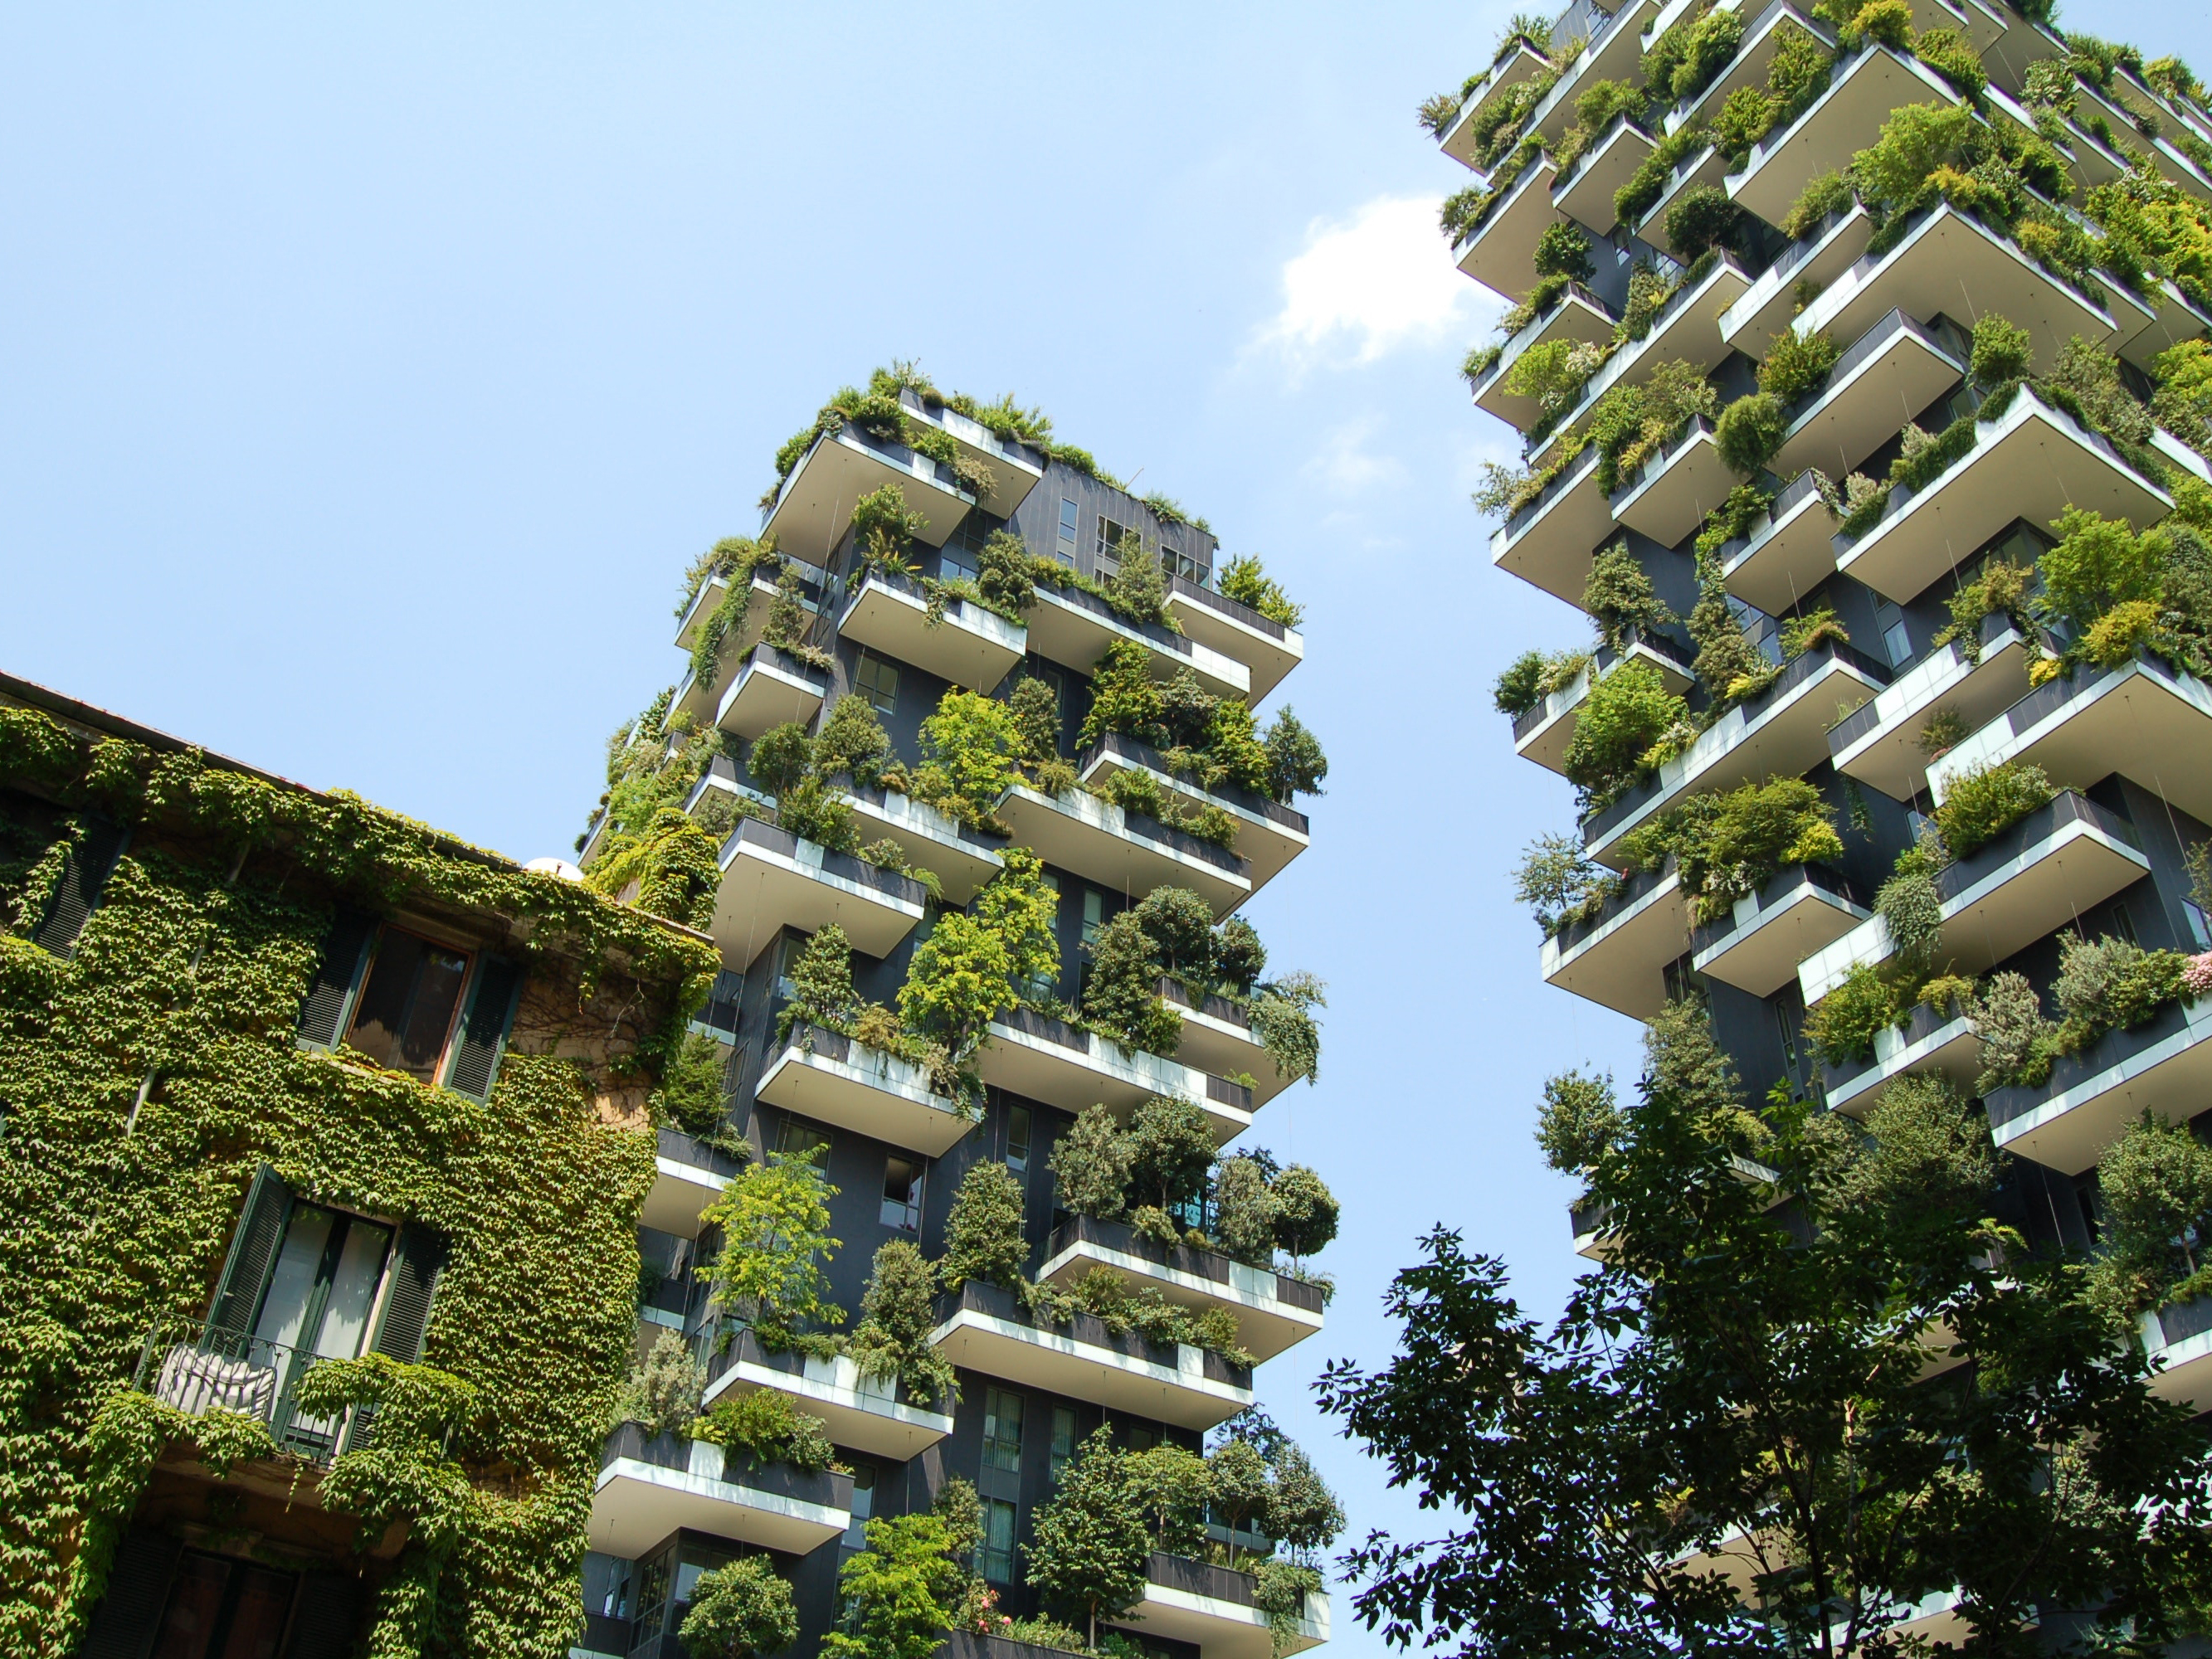 The&nbsp;World&nbsp;Green&nbsp;Building&nbsp;Trends 2018 SmartMarket Report, released by Dodge Data and Analytics, indicates support for the&nbsp;green&nbsp;building&nbsp;sector is growing globally, with organisations across the construction industry shifting towards more sustainable materials and practices. Image: Zureli
